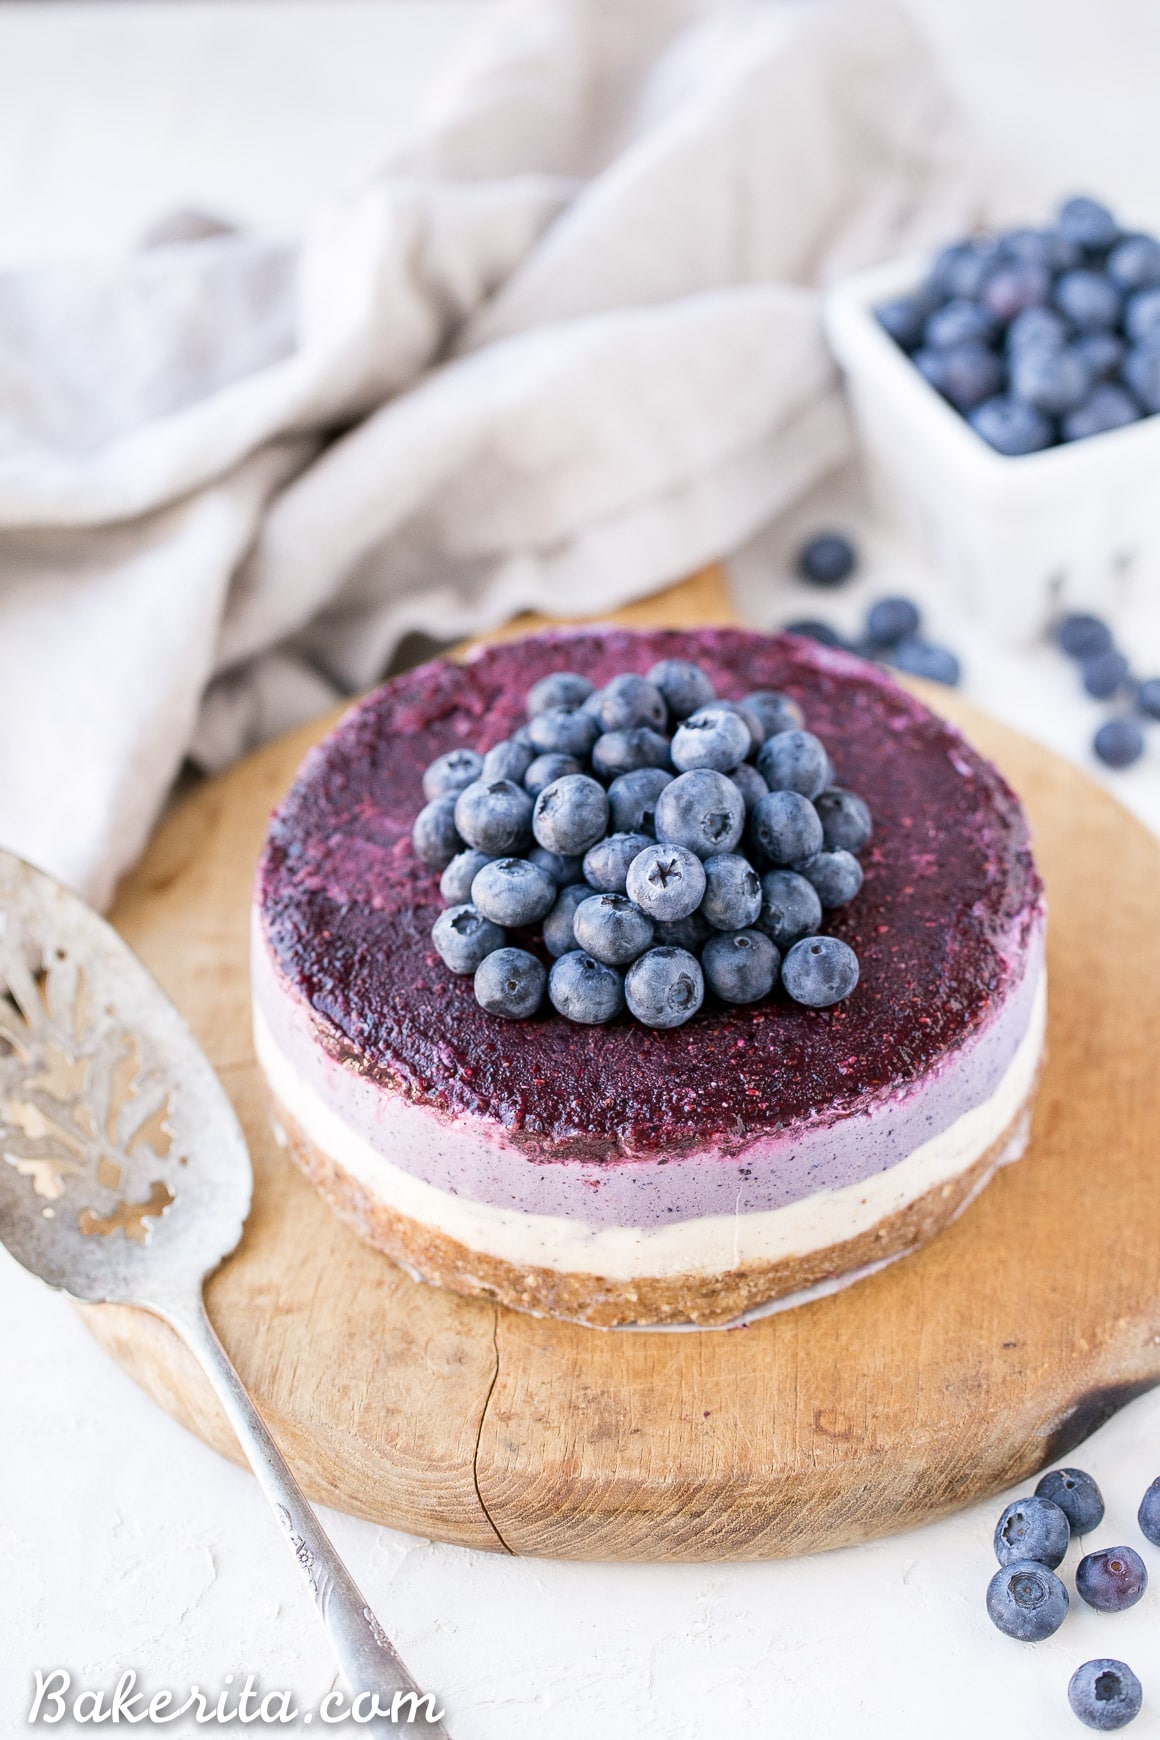 This No-Bake Layered Blueberry Cheesecake is a beautiful and easy-to-make Paleo-friendly + vegan cheesecake made with soaked cashews! The cheesecake layers are lusciously smooth and creamy with a tart, fruity topping.